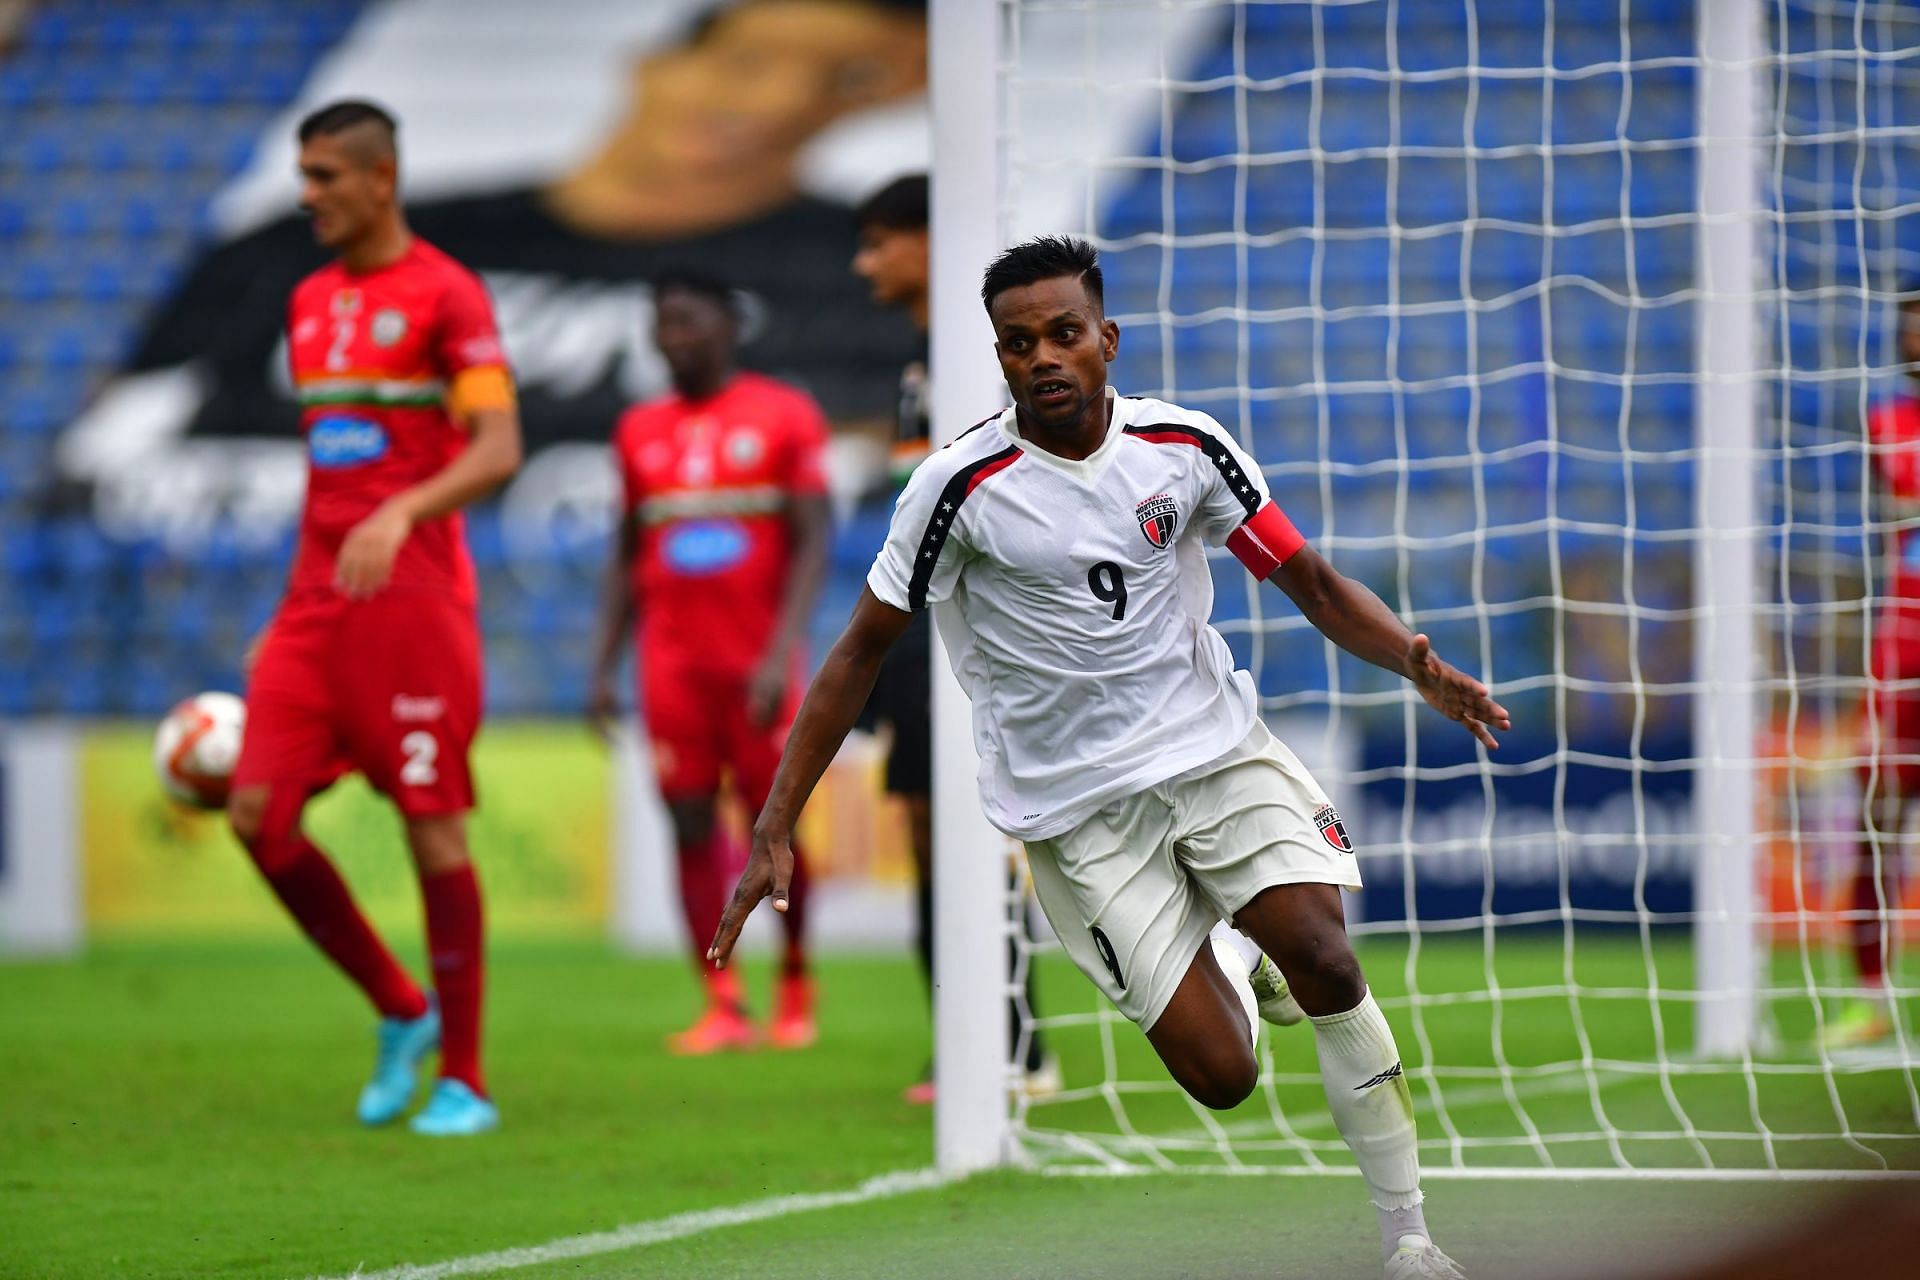 NEUFC ended their 2022 Durand Cup campaign with a win over Sudeva Delhi. [Credits: Suman Chattopadhyay / www.imagesolutionr.in]